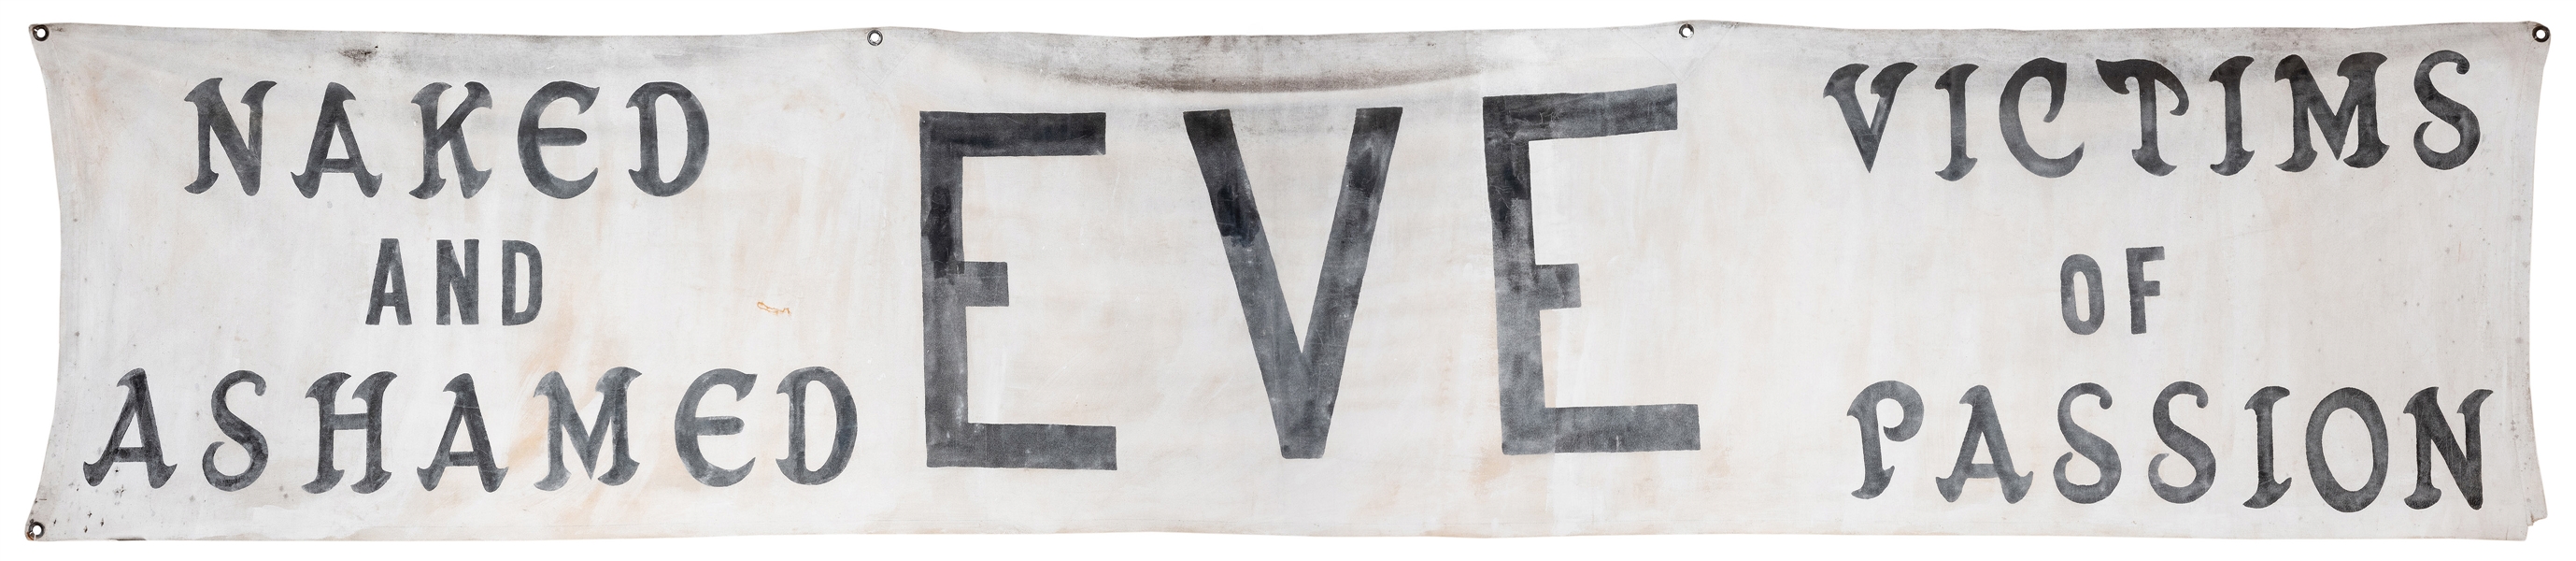  Eve. Naked and Ashamed. Victims of Passion. Sideshow Banner...